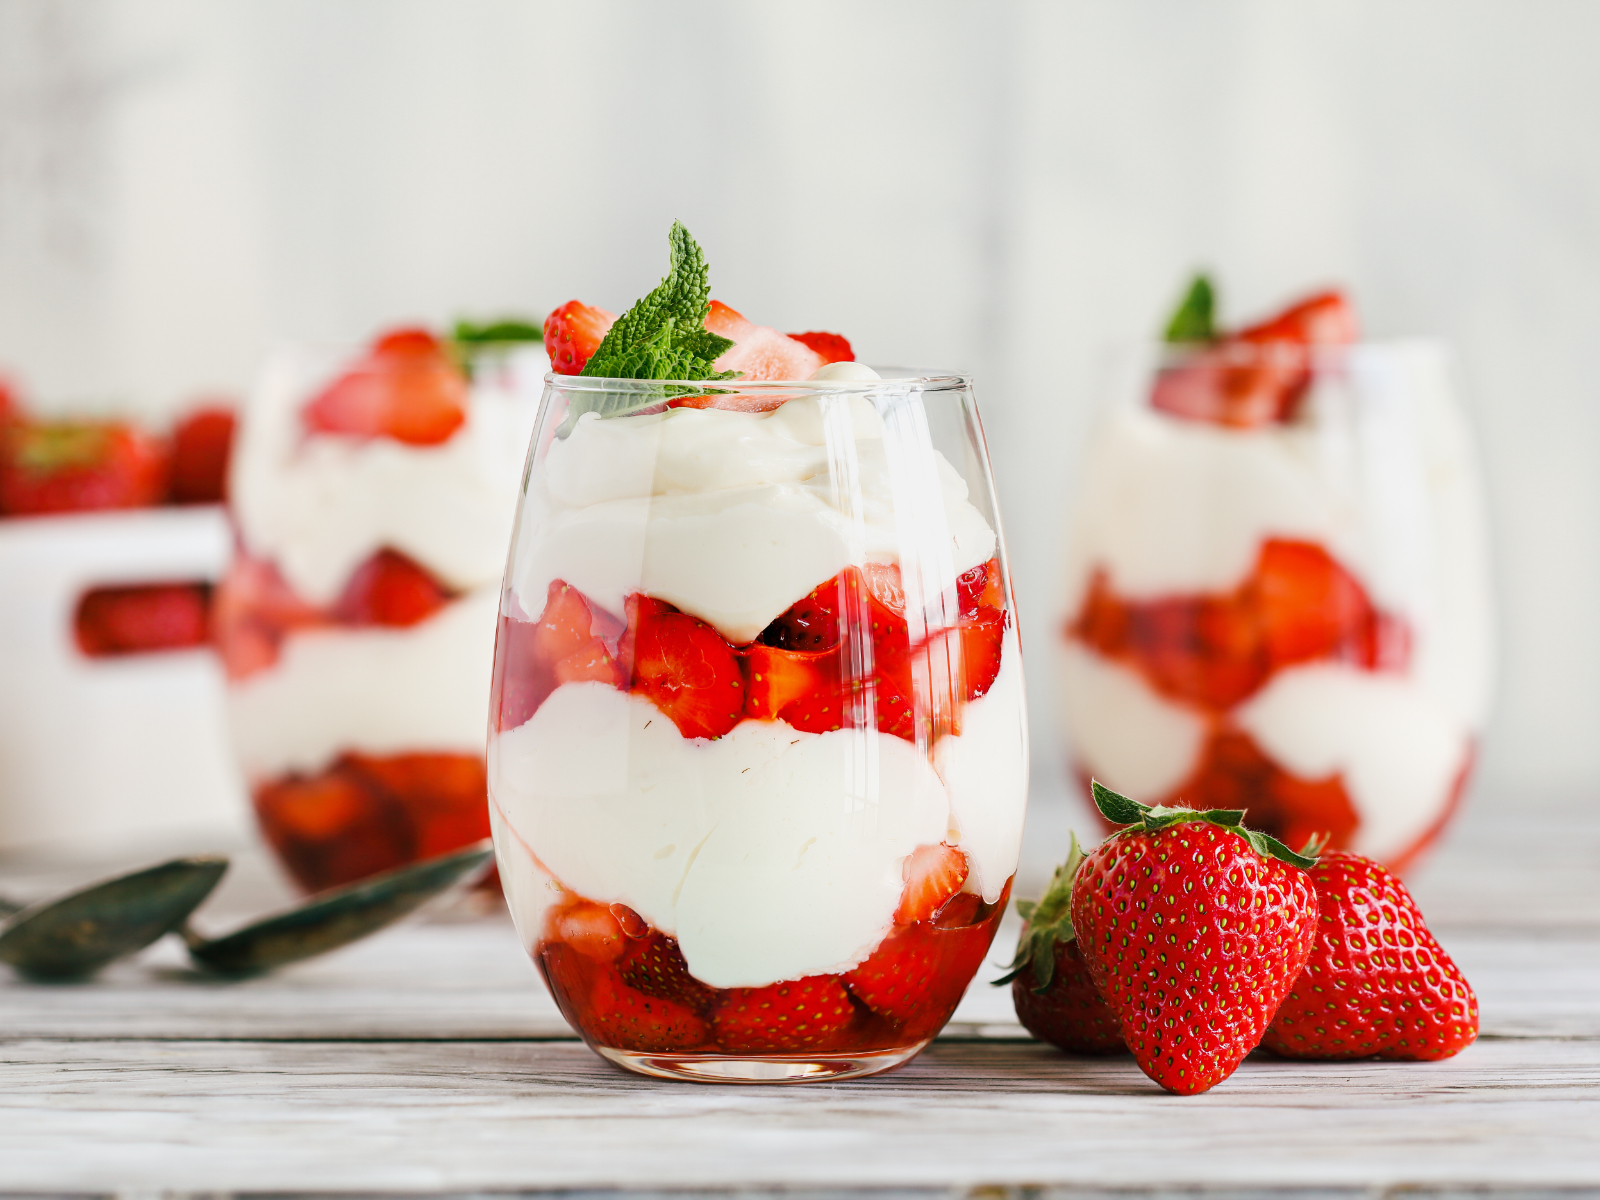 yogurt parfait with strawberries layered in a cup